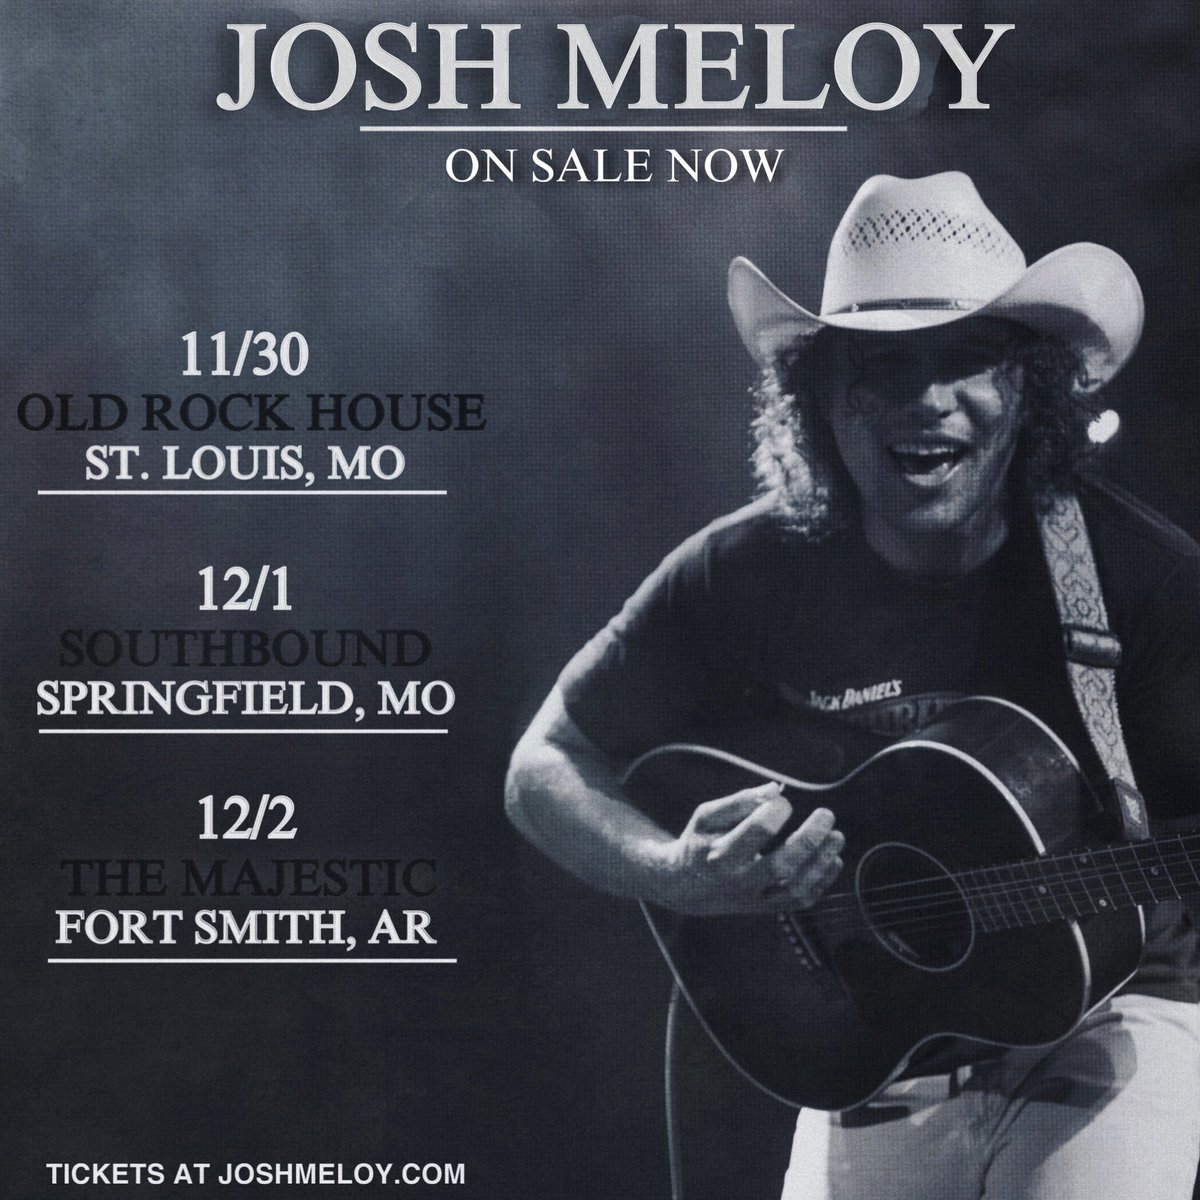 JUST ANNOUNCED‼️ St. Louis, Springfield, & Fort Smith tickets are ON SALE NOW. Get while they’re hot at joshmeloy.com